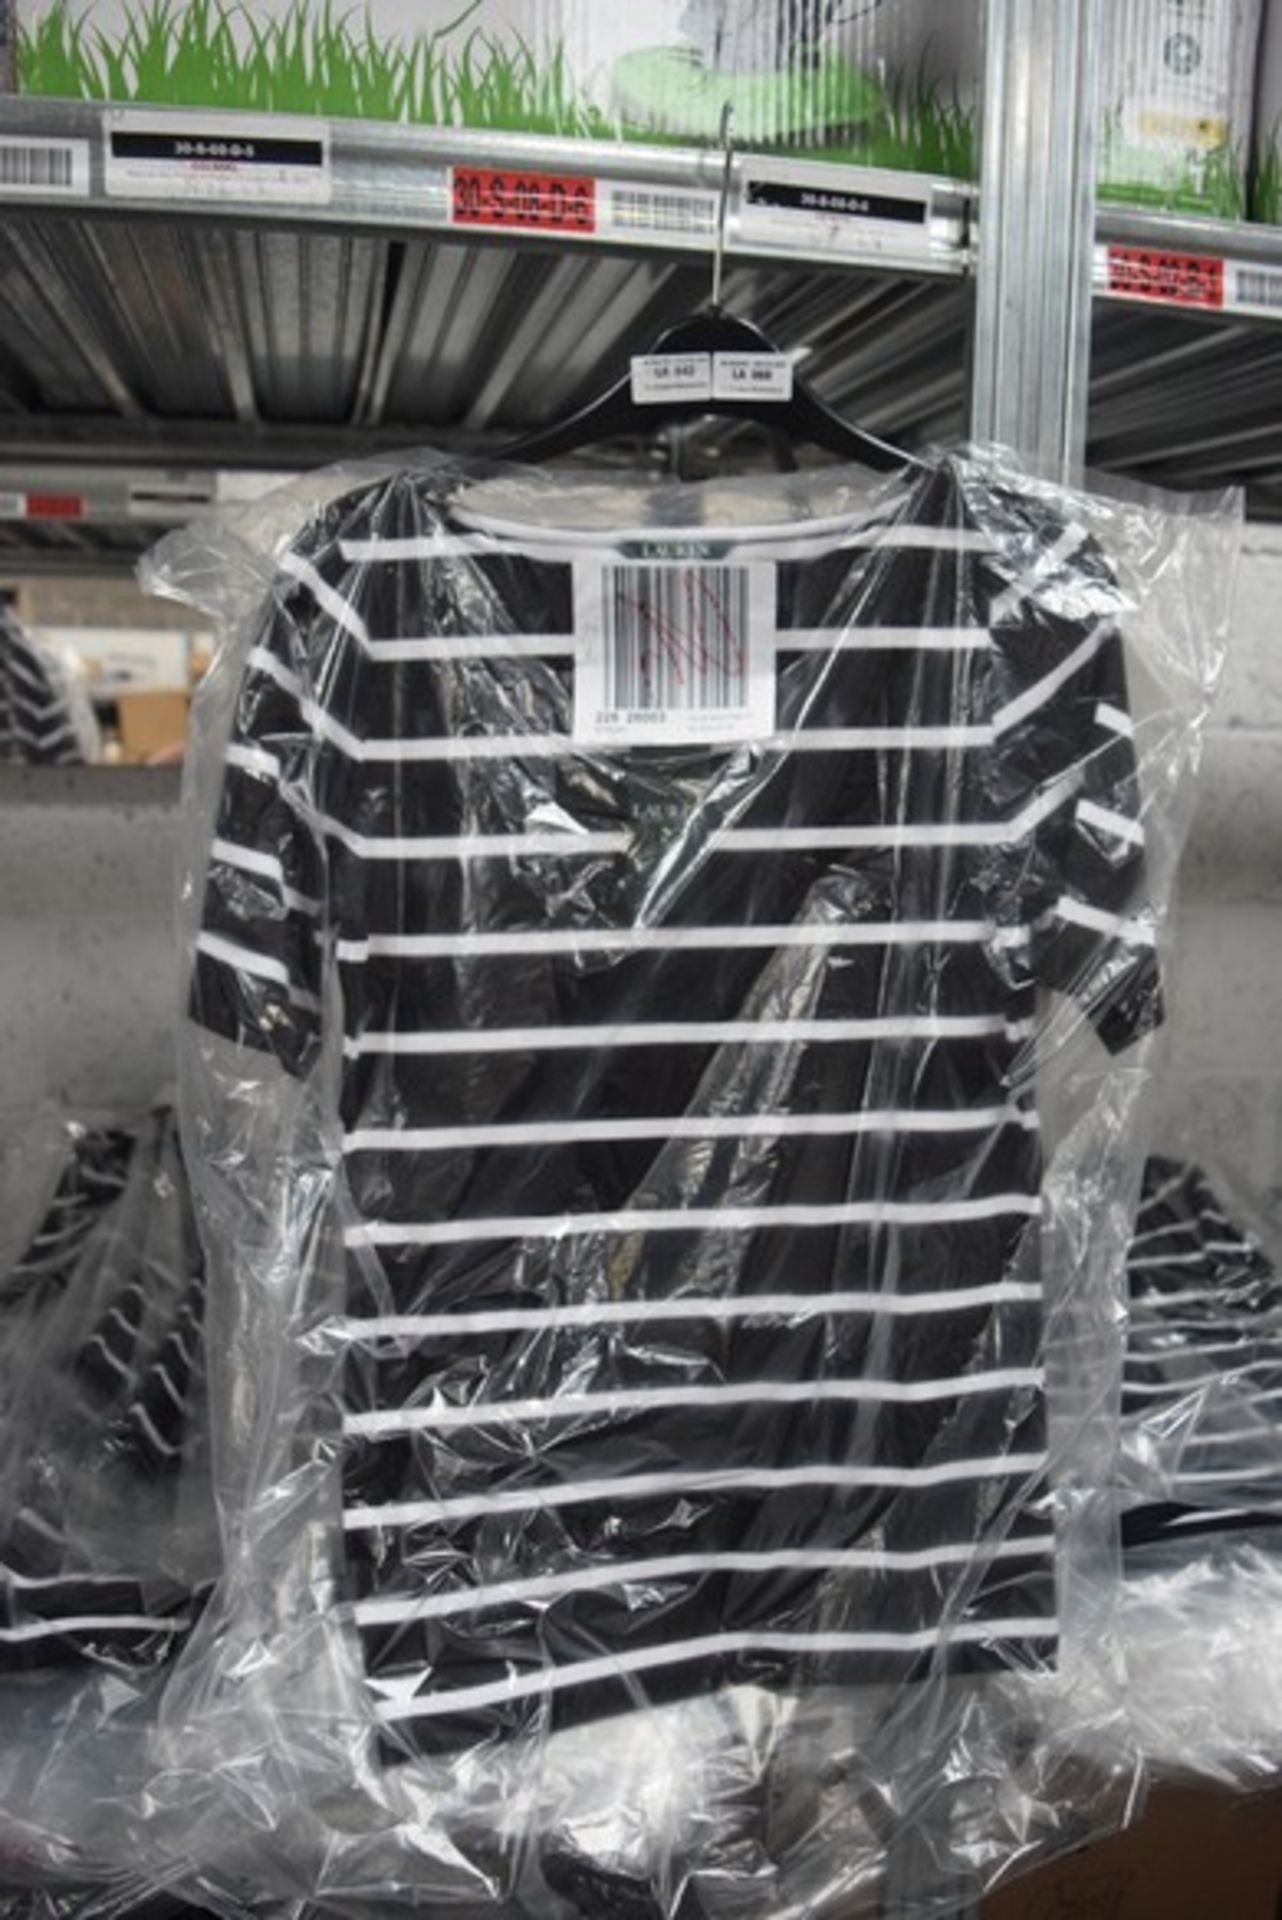 1 x BRAND NEW PACKAGED RALPH LAUREN AILIS BOAT NECK BLACK AND WHITE STRIPE LADIES T-SHIRT SIZE